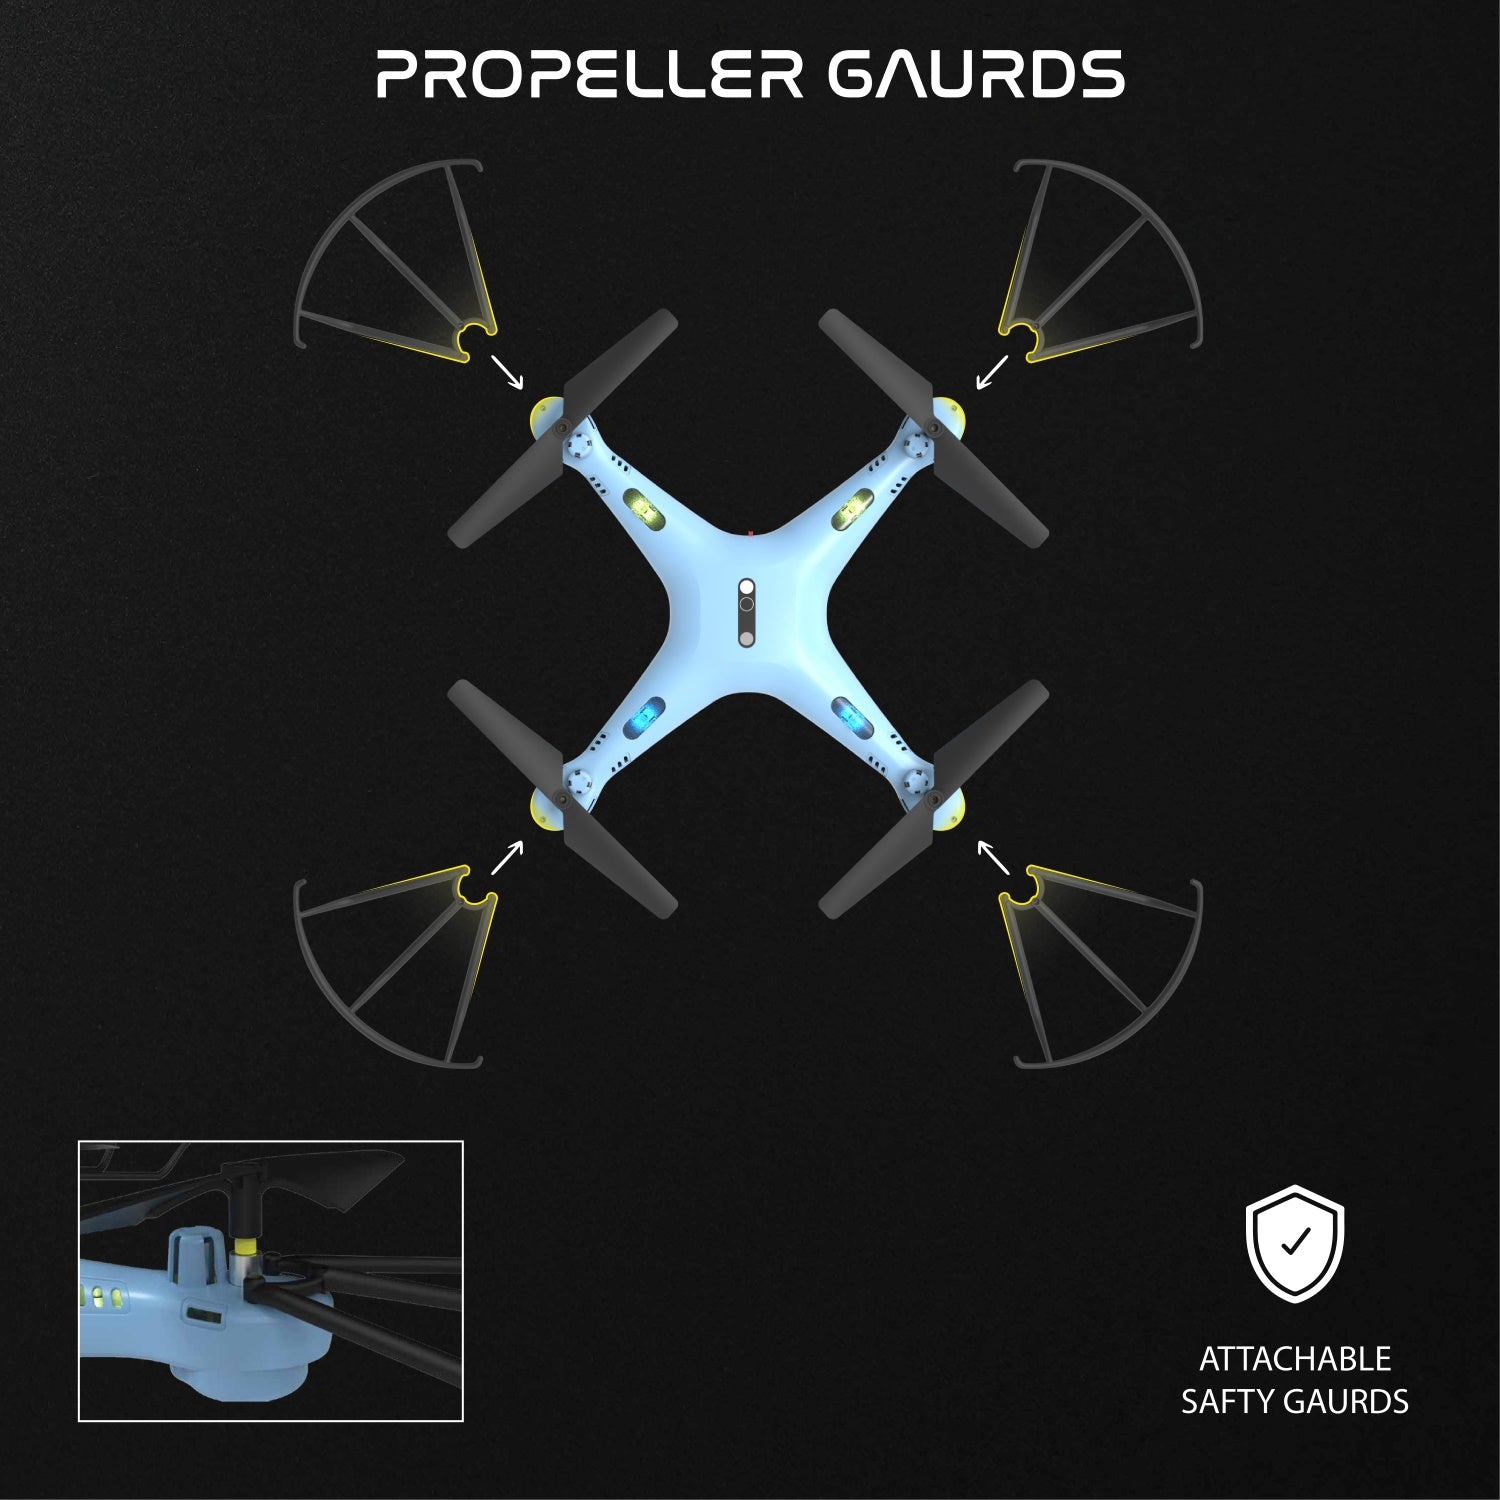 skymaster drone propellers guards. Guards for skymaster pro